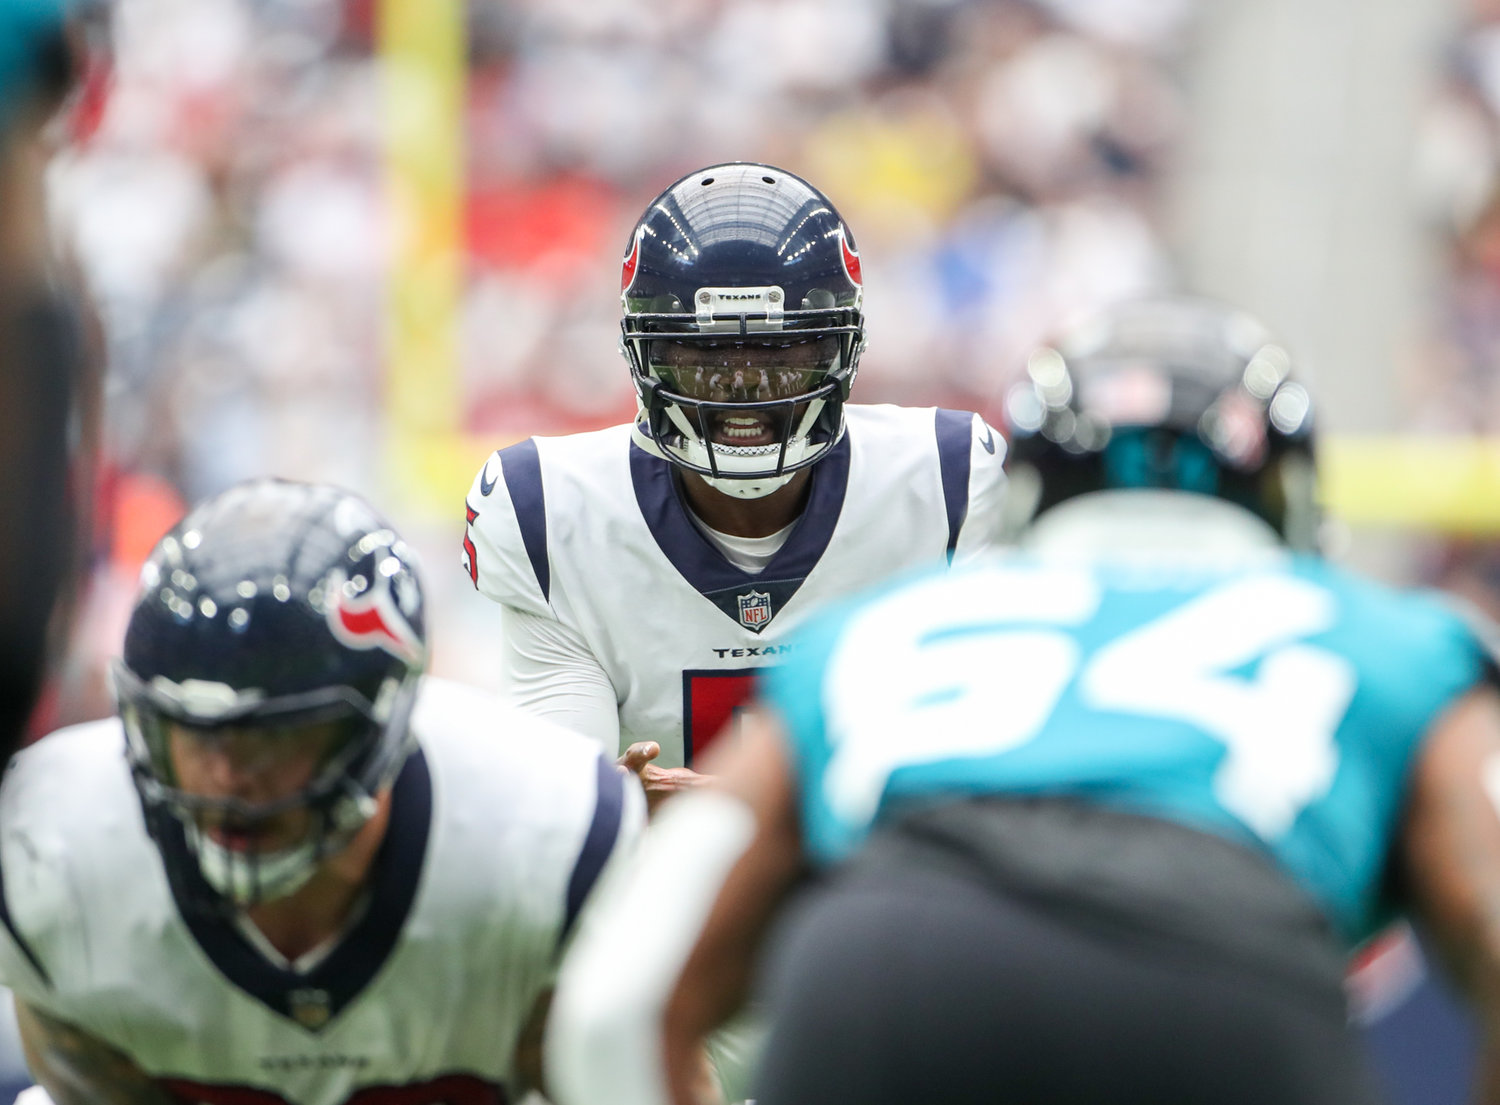 Houston Texans quarterback Tyrod Taylor (5) at the line of scrimmage during the first half of an NFL game between the Houston Texans and the Jacksonville Jaguars on September 12, 2021 in Houston, Texas.